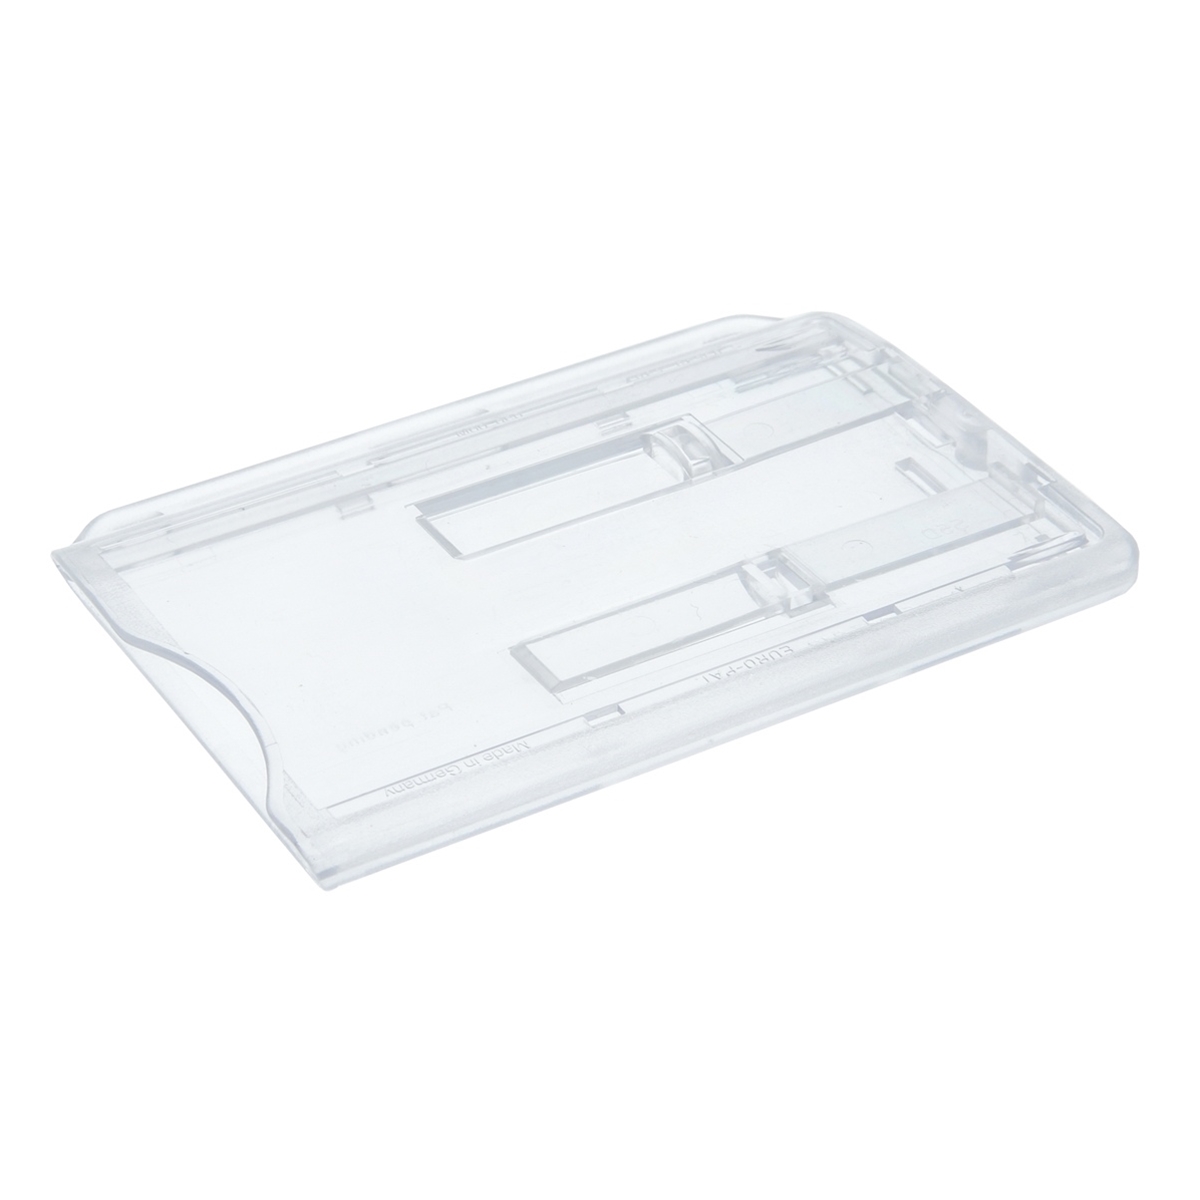 clear enclosed double id card holder with sliders in landscape postition